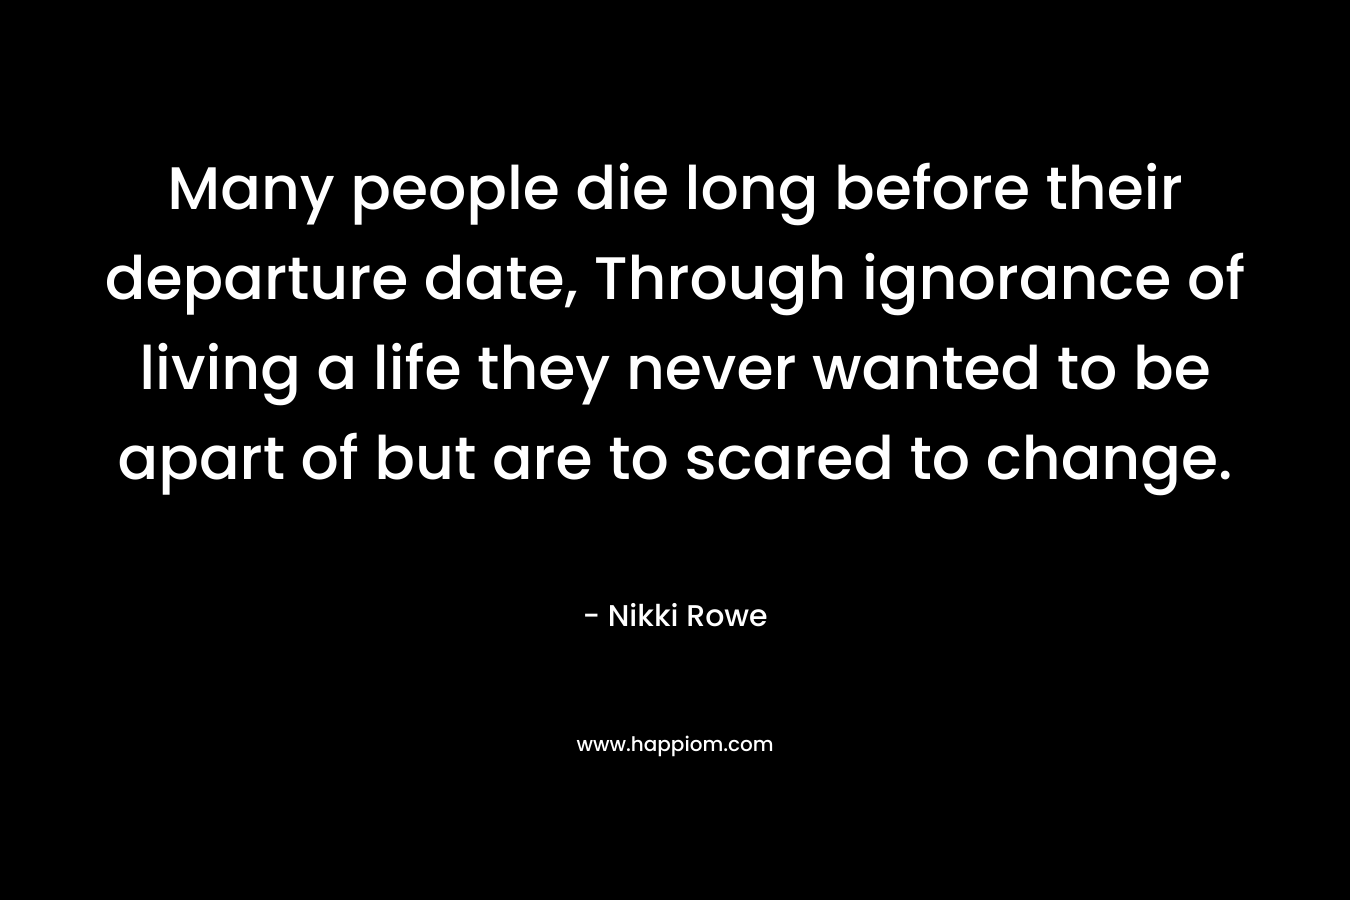 Many people die long before their departure date, Through ignorance of living a life they never wanted to be apart of but are to scared to change. – Nikki Rowe